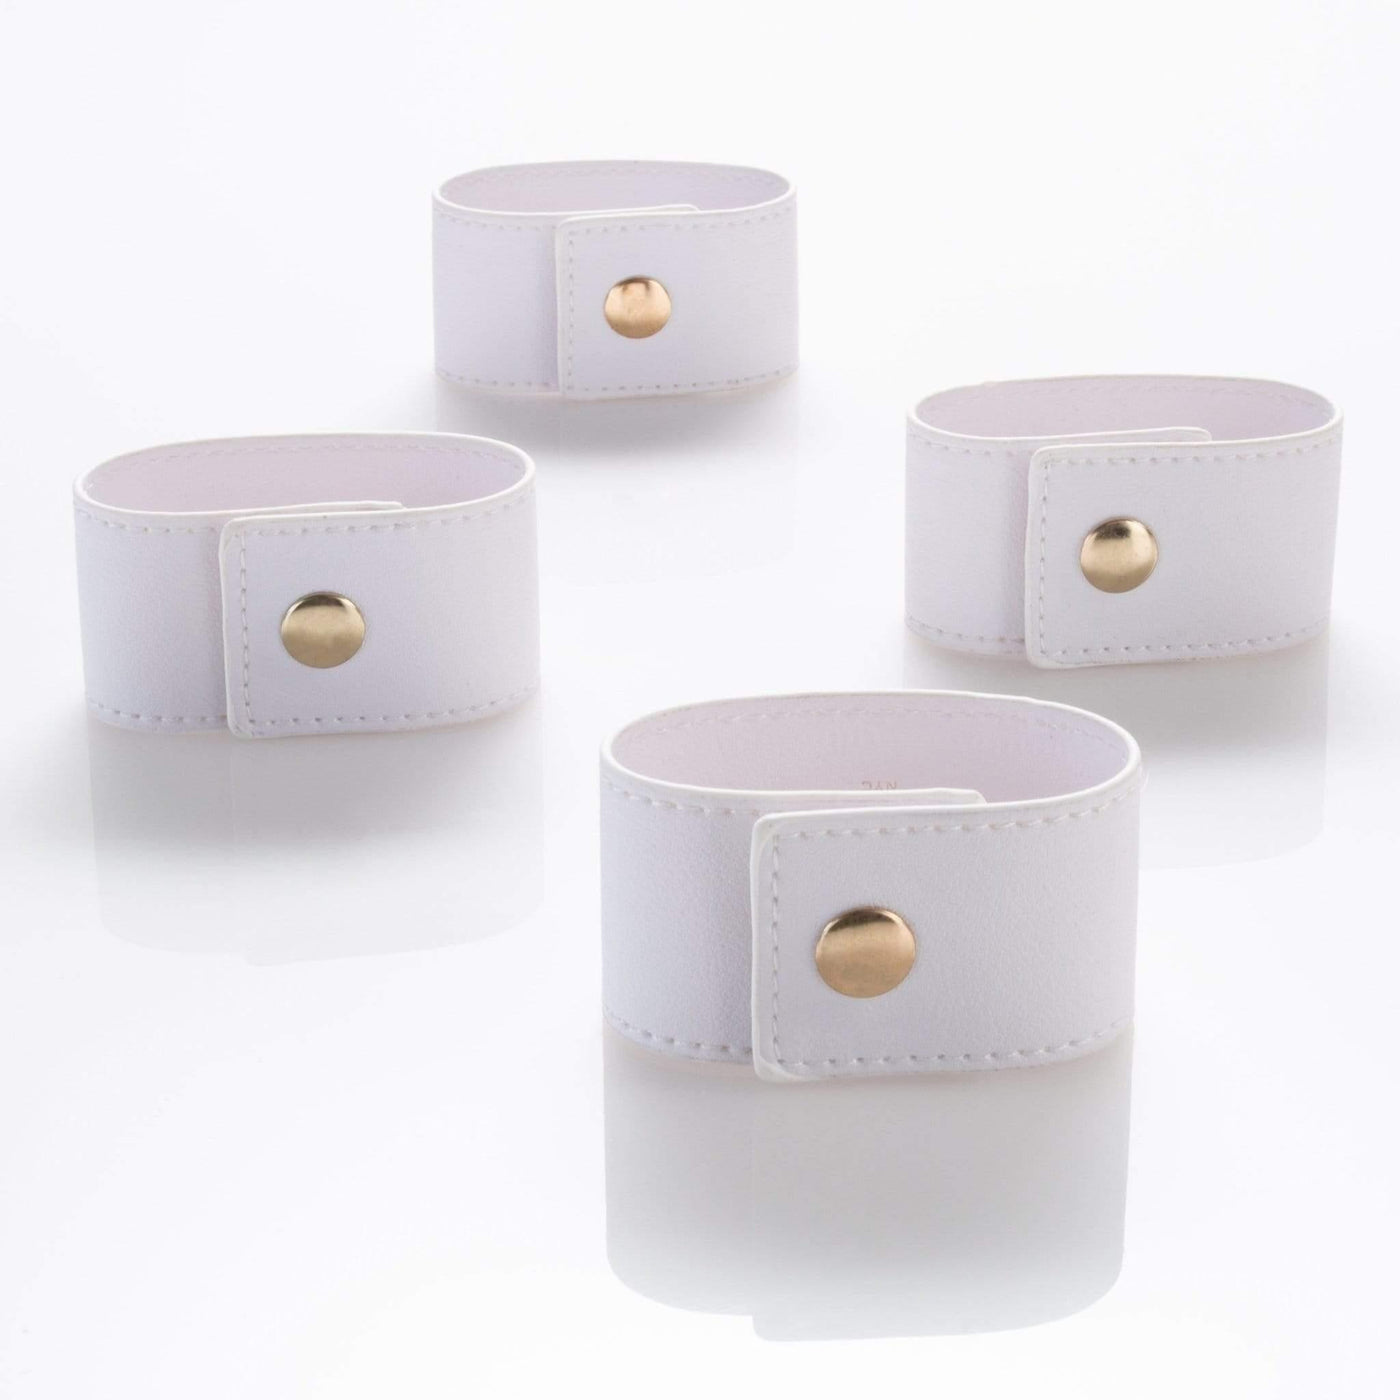 White Band and Gold Snap Faux Leather Napkin Rings | 4 Napkin Rings - Set With Style